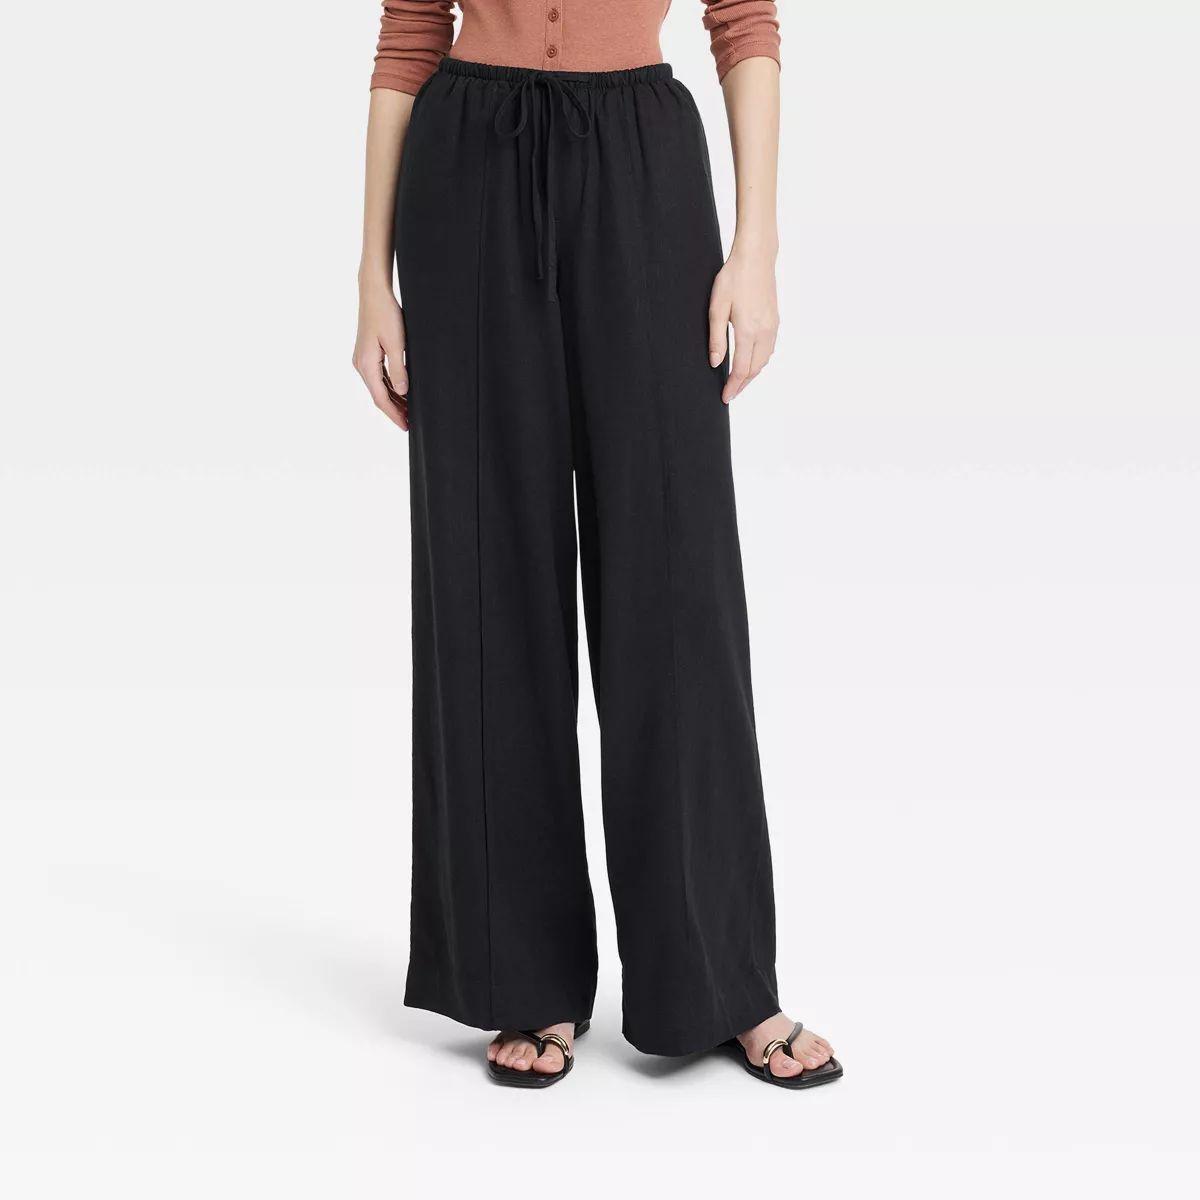 Women's High-Rise Wide Leg Linen Pull-On Pants - A New Day™ Black/White Striped XS | Target